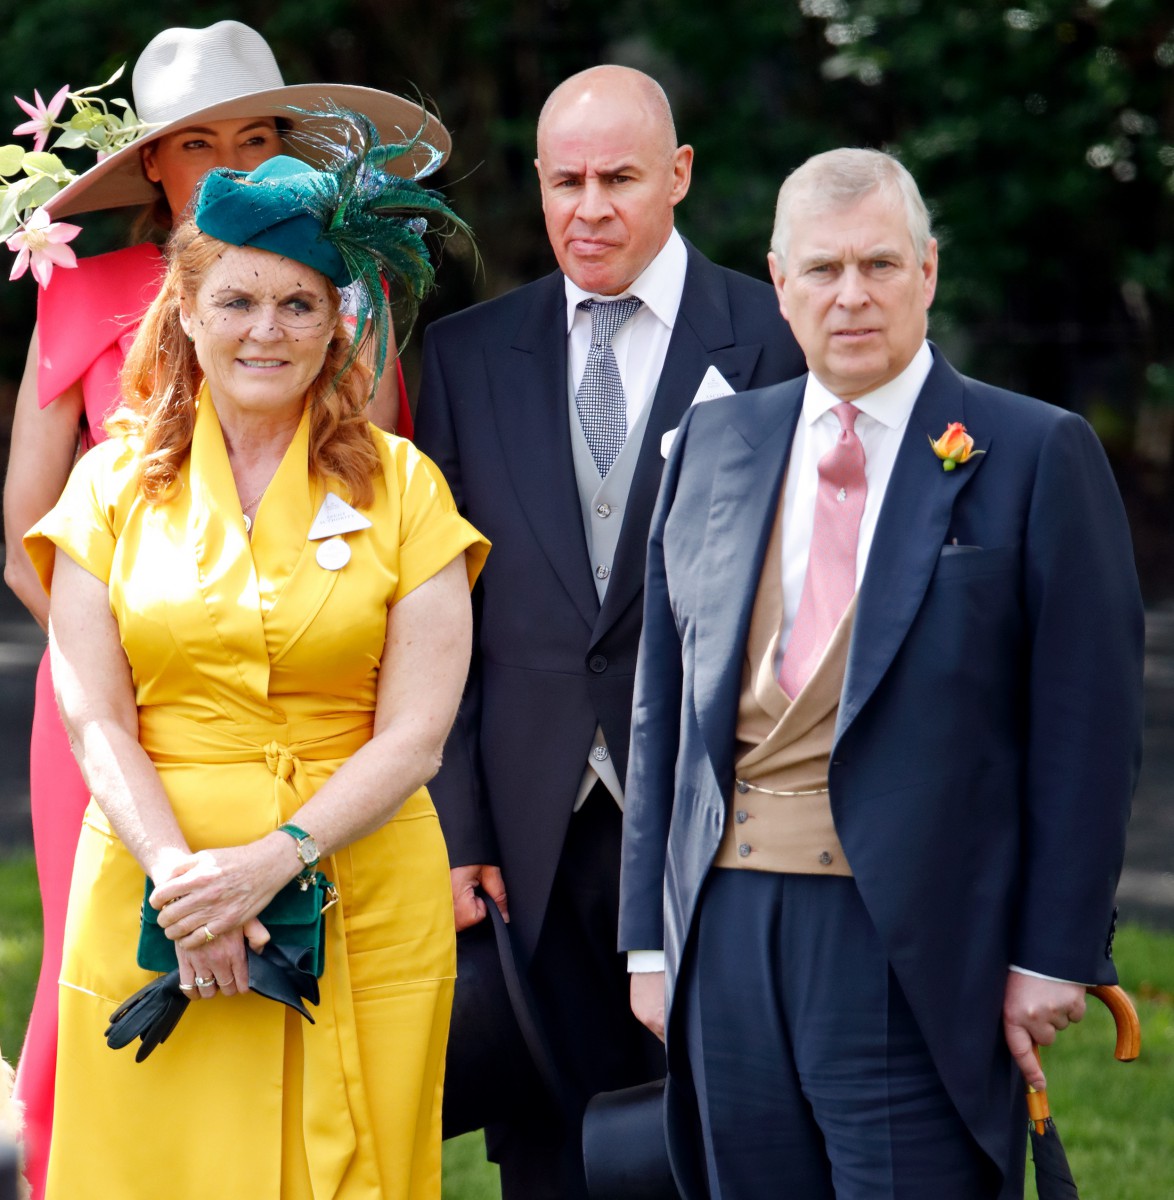 Johan Eliasch is seen standing by friend Prince Andrew at Ascot Racecourse